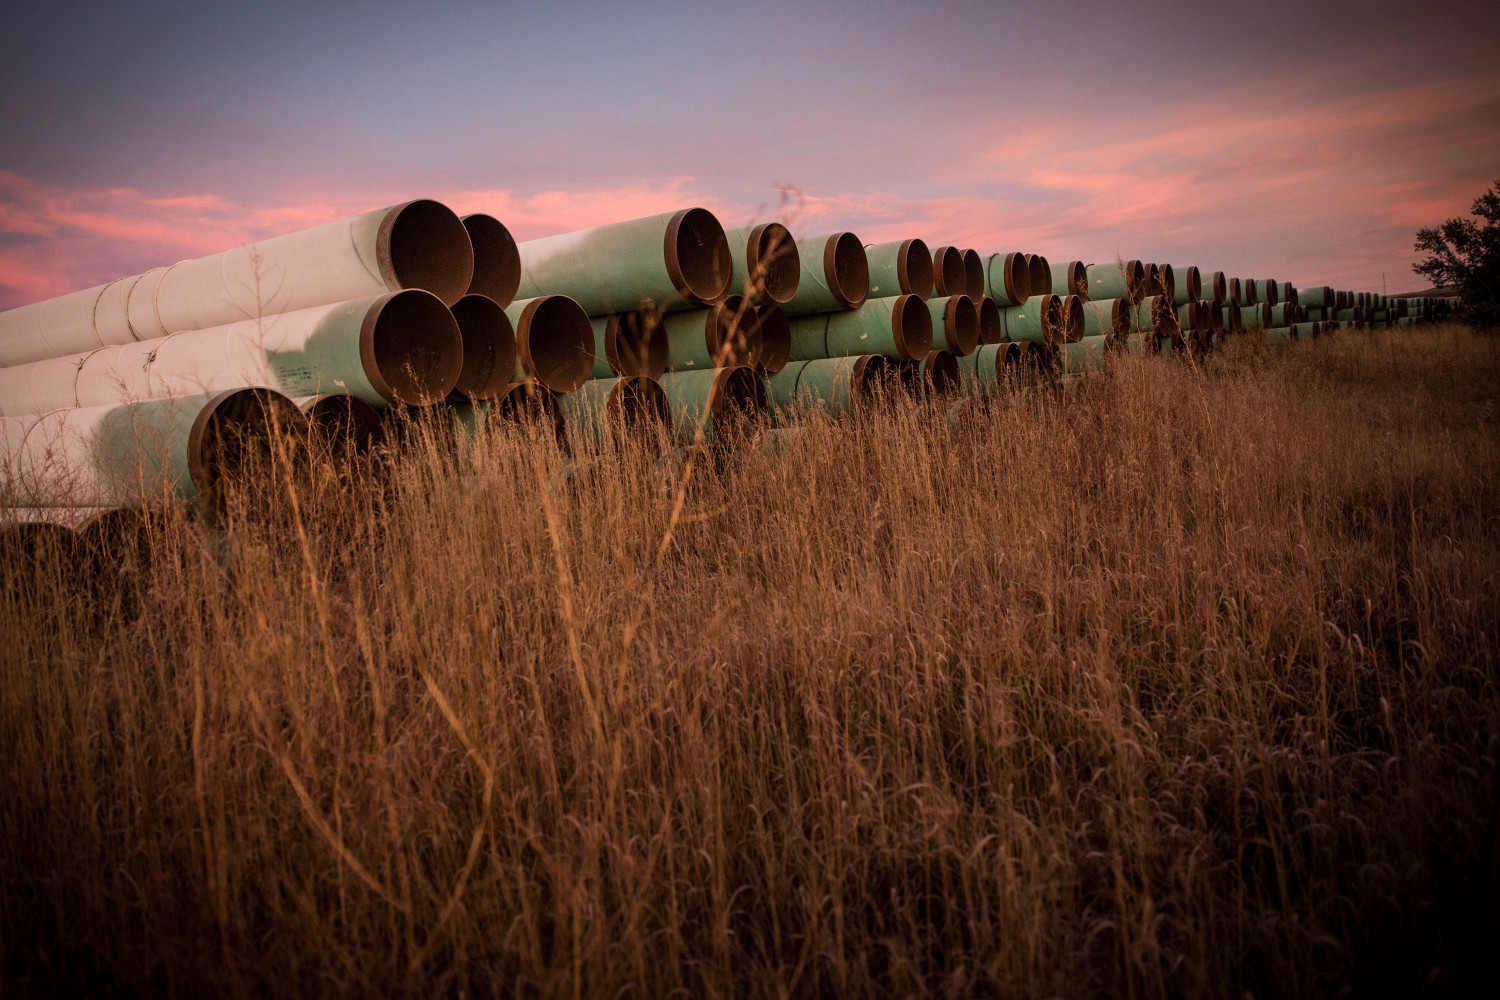 14 State AGs Say Keystone Cancellation Delivers ‘Crippling Economic Injuries,’ Threaten Legal Action